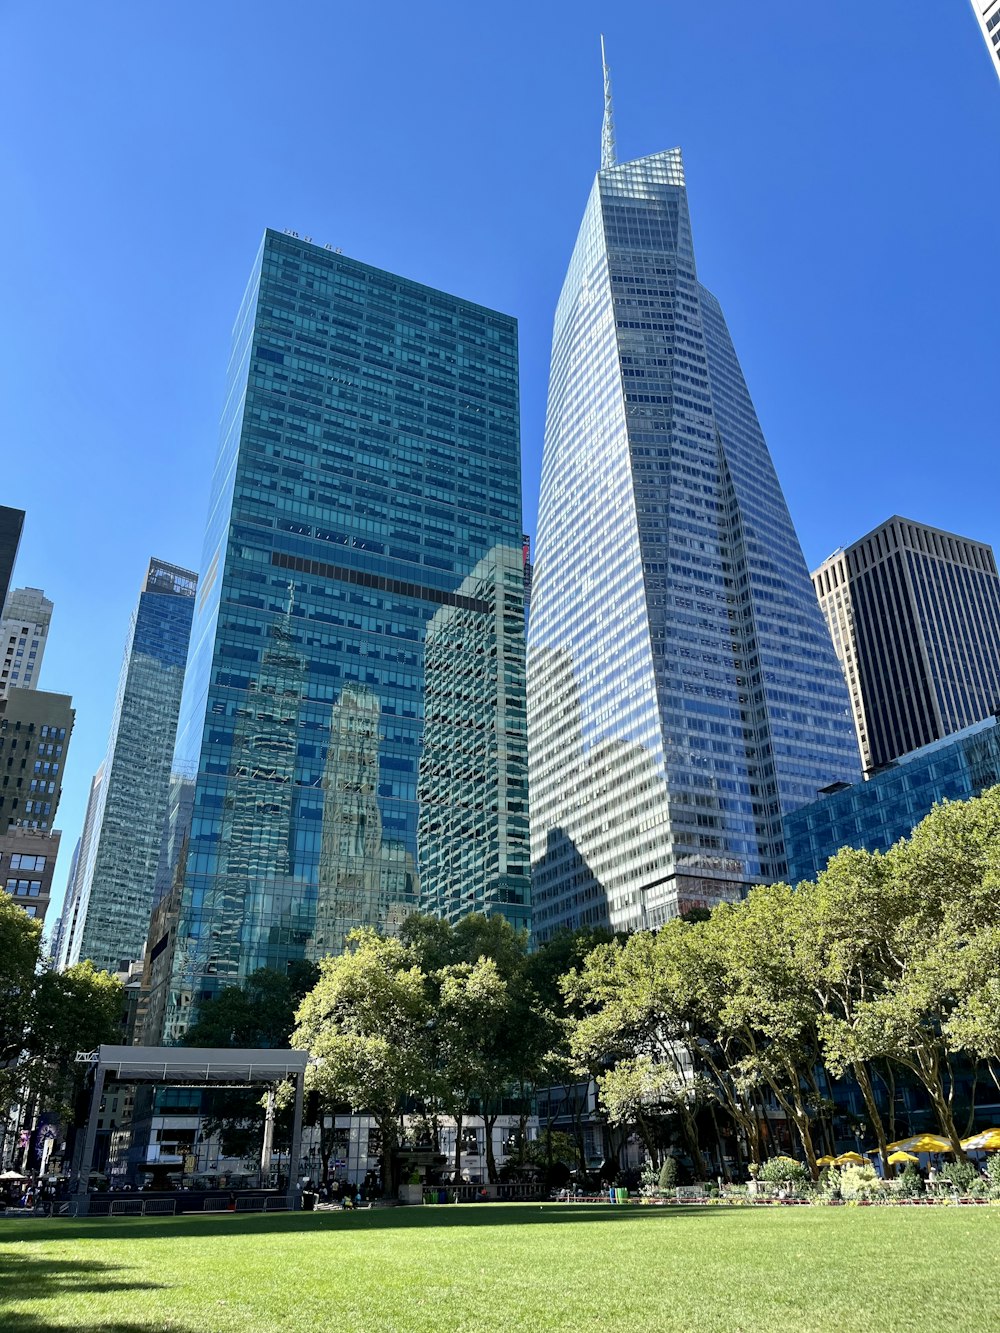 a grassy area in a city park with skyscrapers in the background